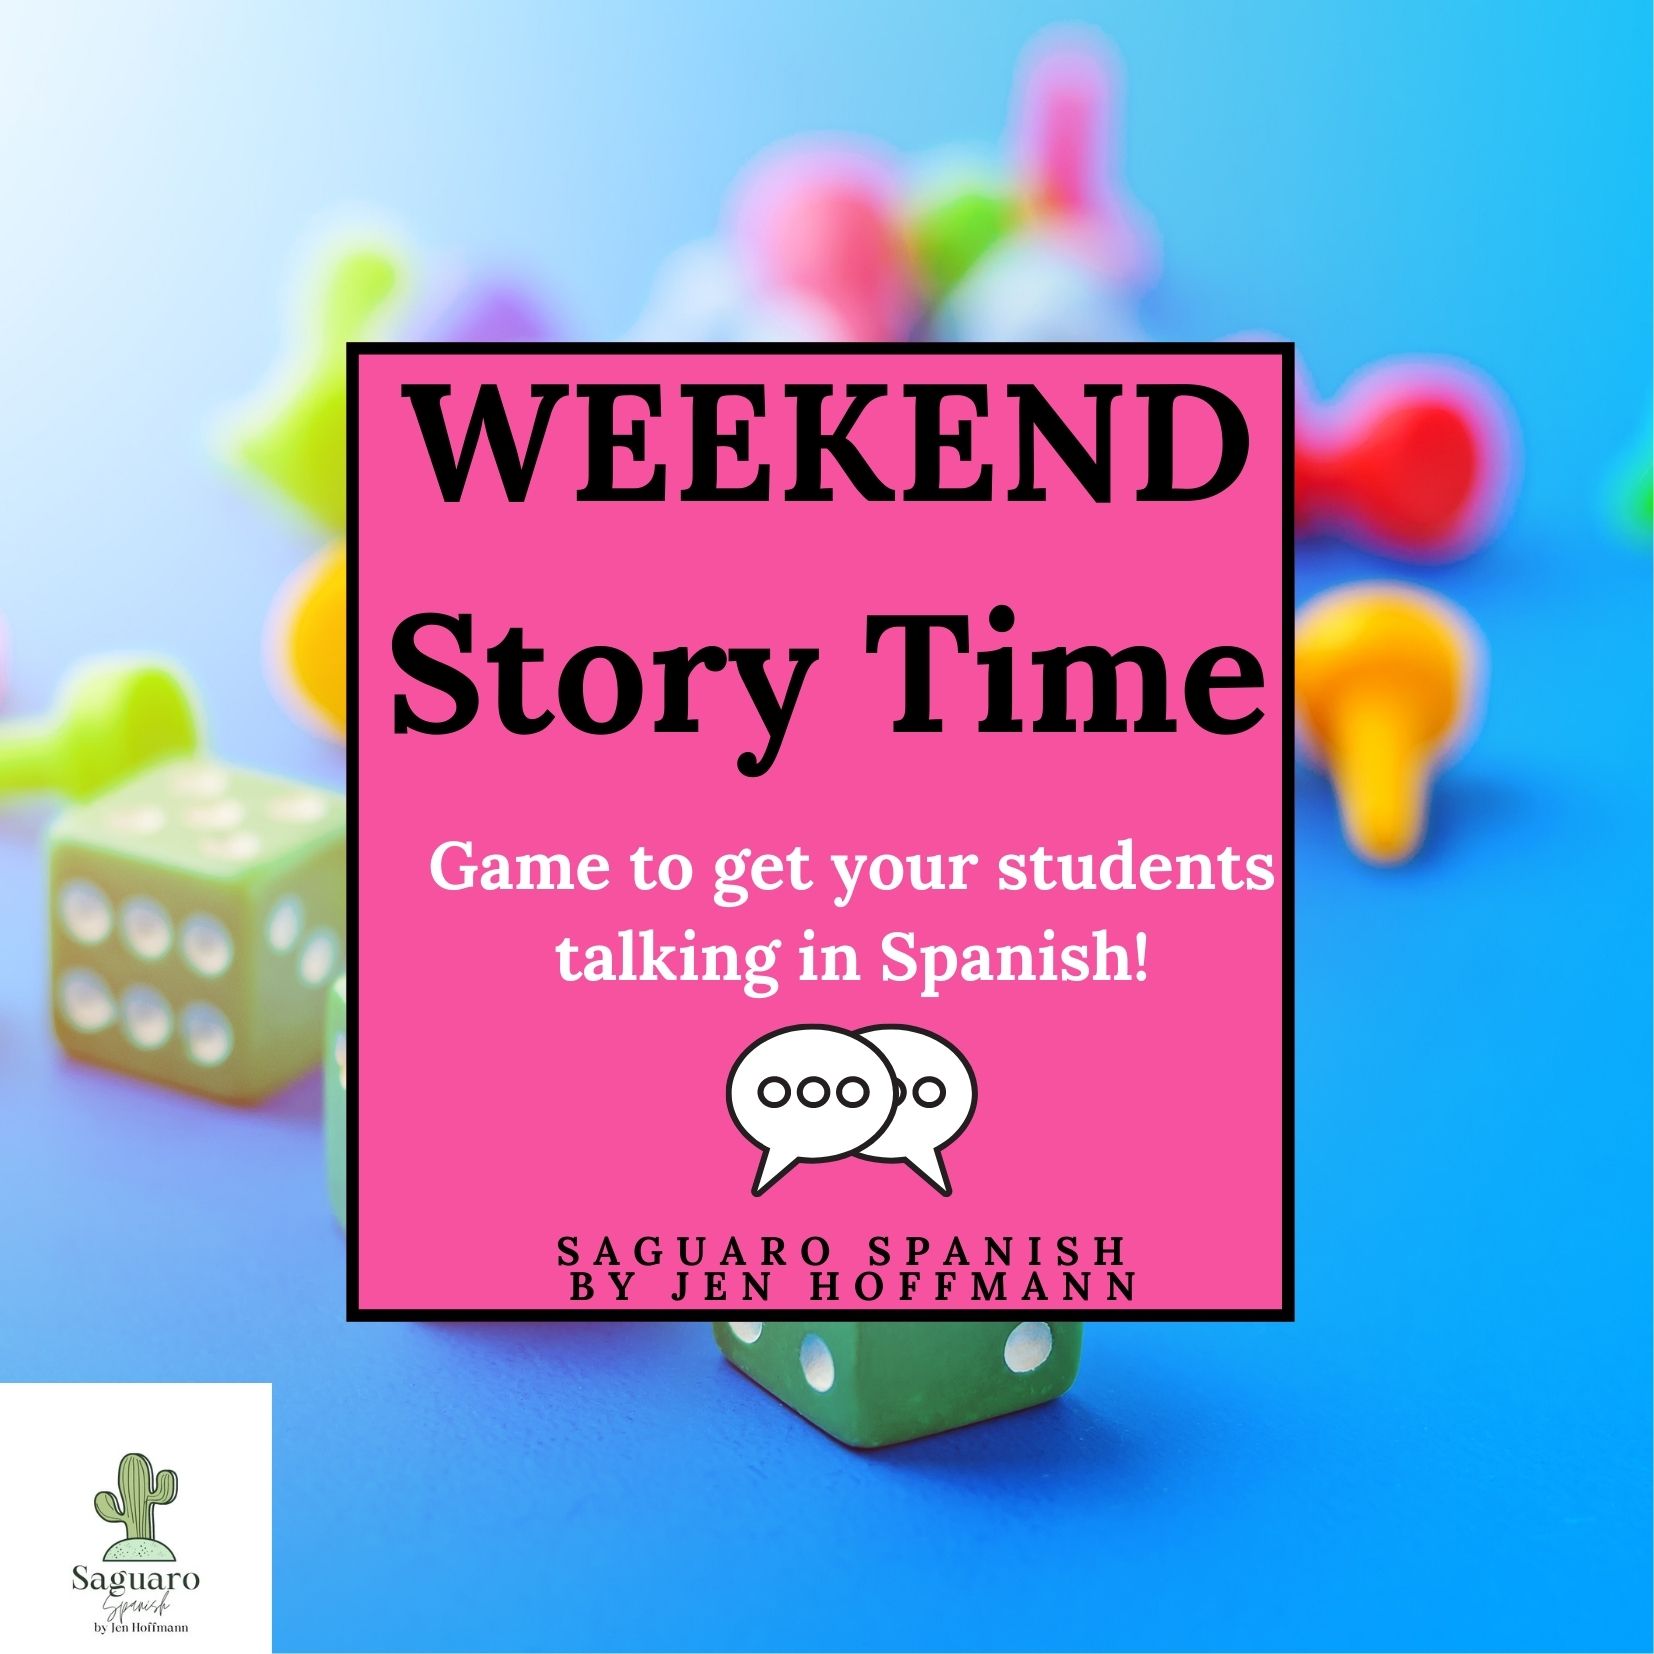 Weekend Story Time: No Prep Board Game to Get your Students Speaking Spanish